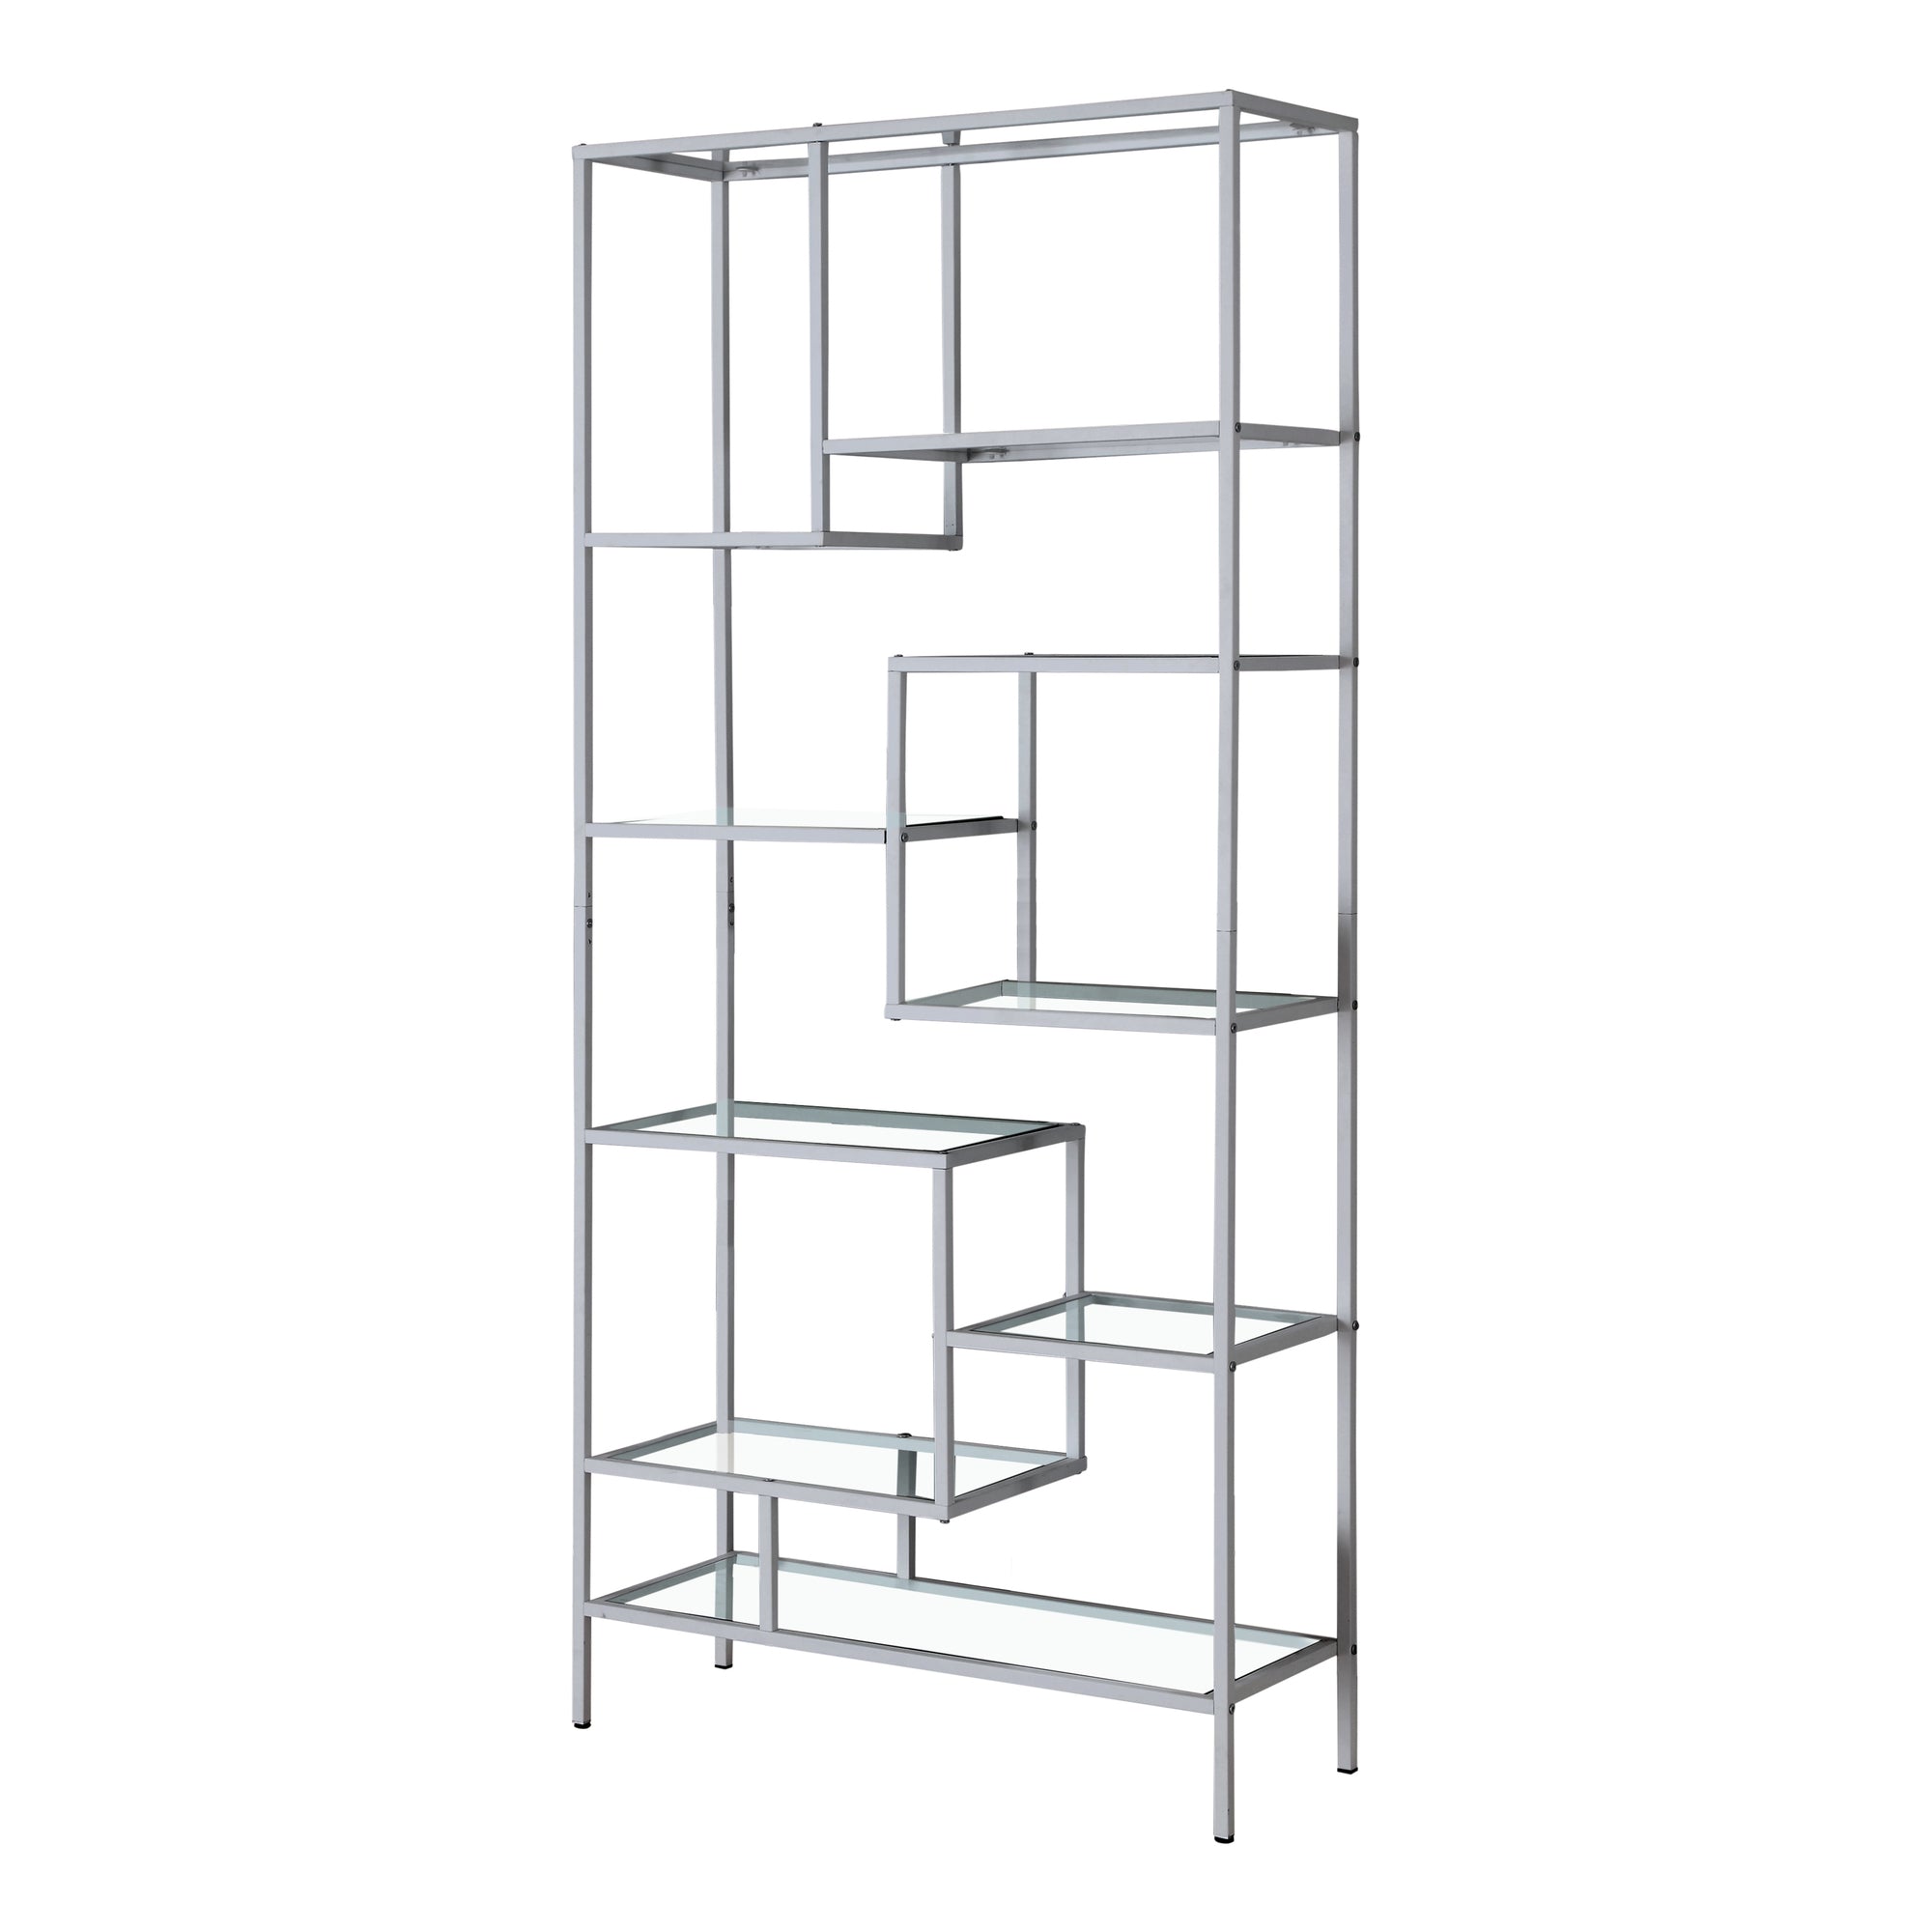 MN-277158    Bookshelf, Bookcase, Etagere, Office, Bedroom, 72"H, Metal, Tempered Glass, Grey, Contemporary, Modern